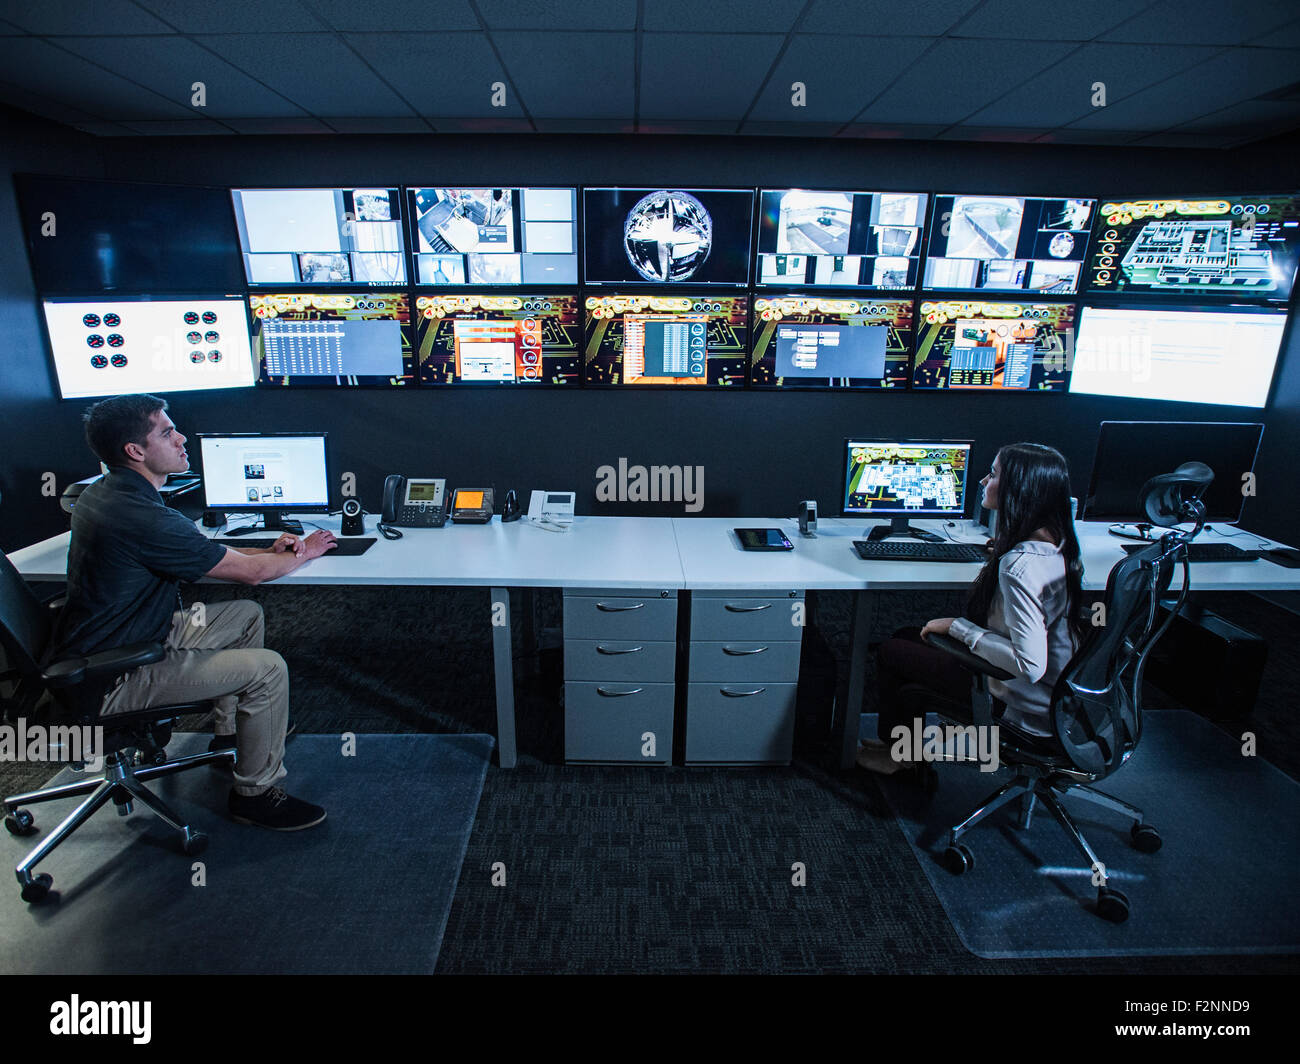 Security guards watching monitors in control room Stock Photo